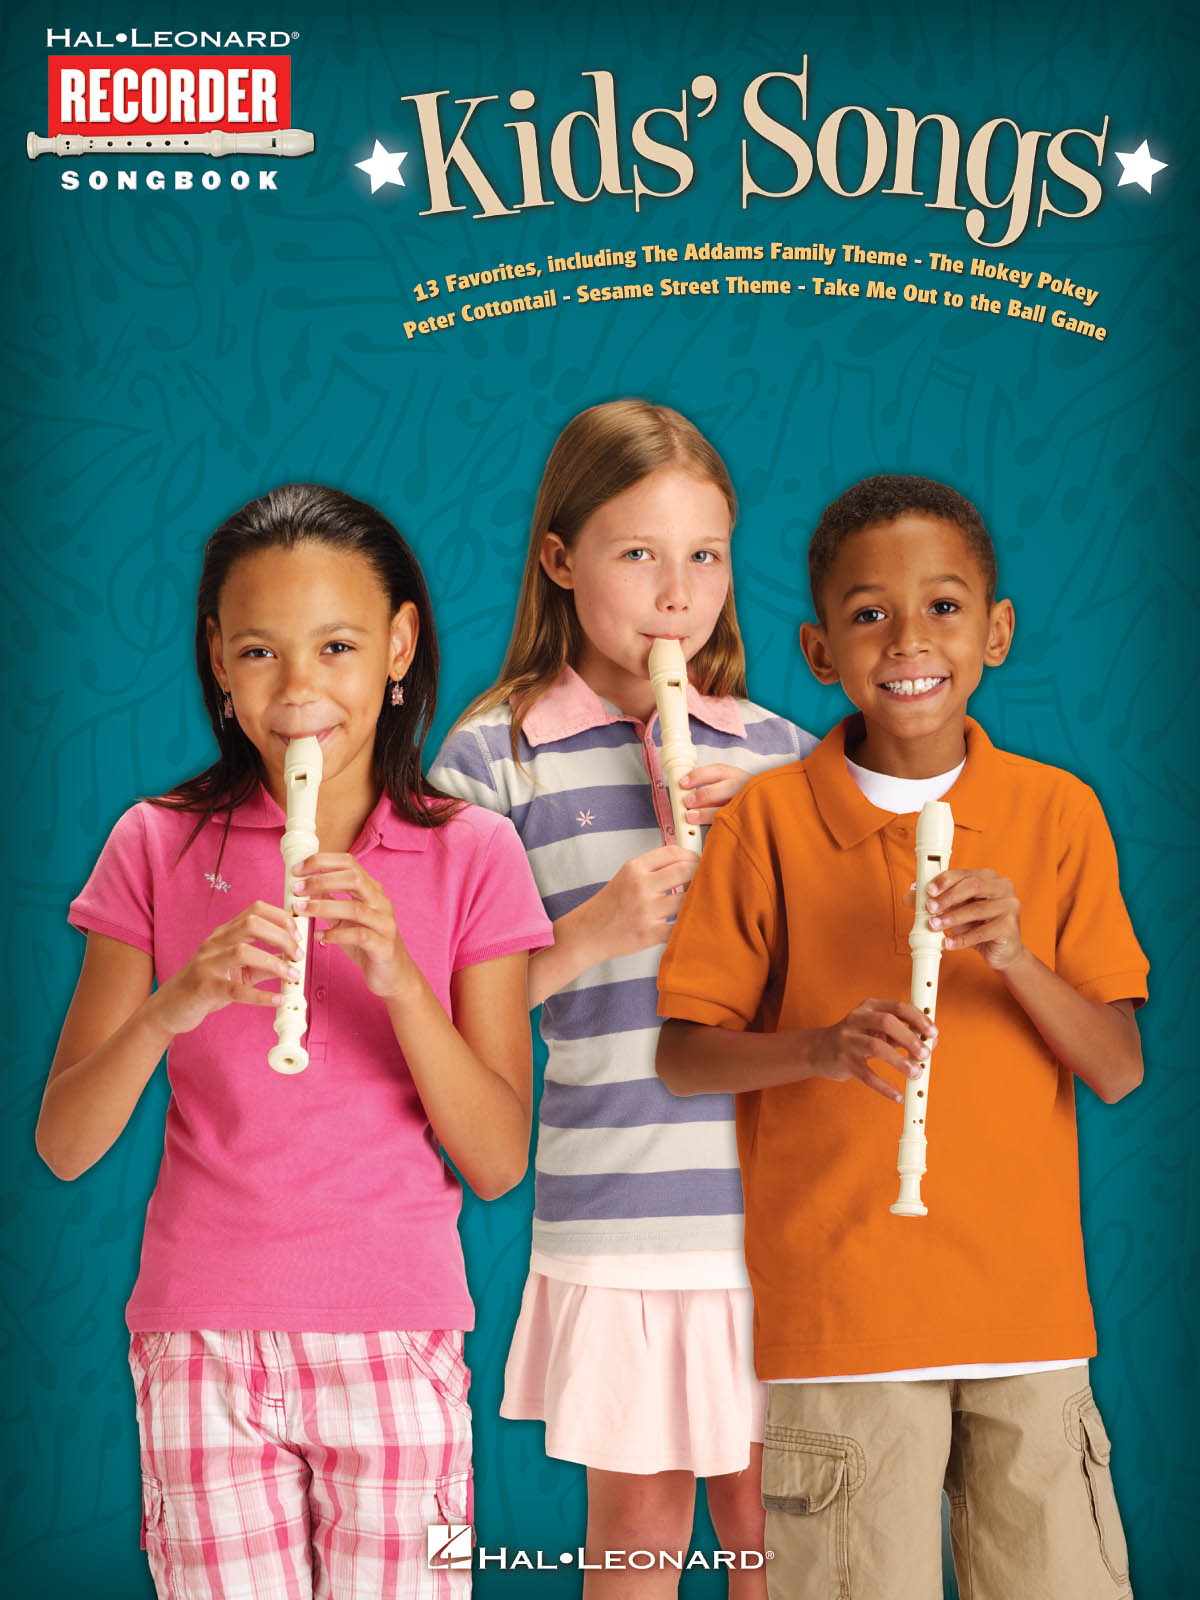 Kids' Songs: Recorder: Mixed Songbook